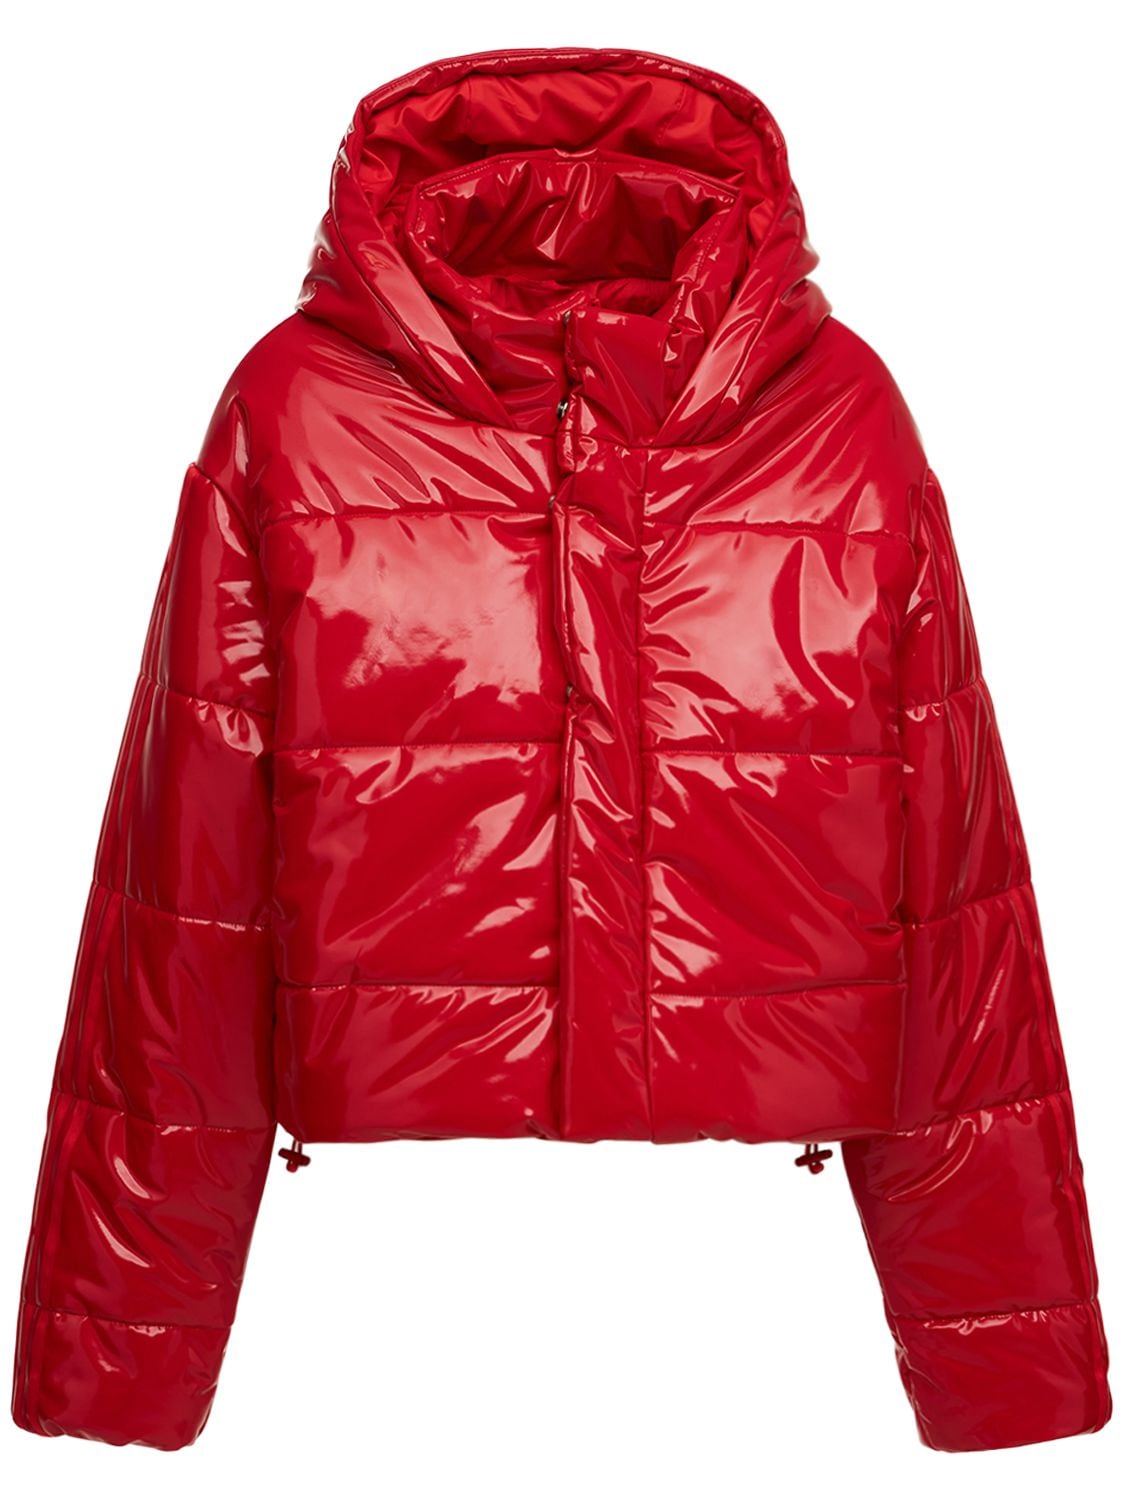 Adidas X Ivy Park Ivy Park Puffer Jacket In Red | ModeSens